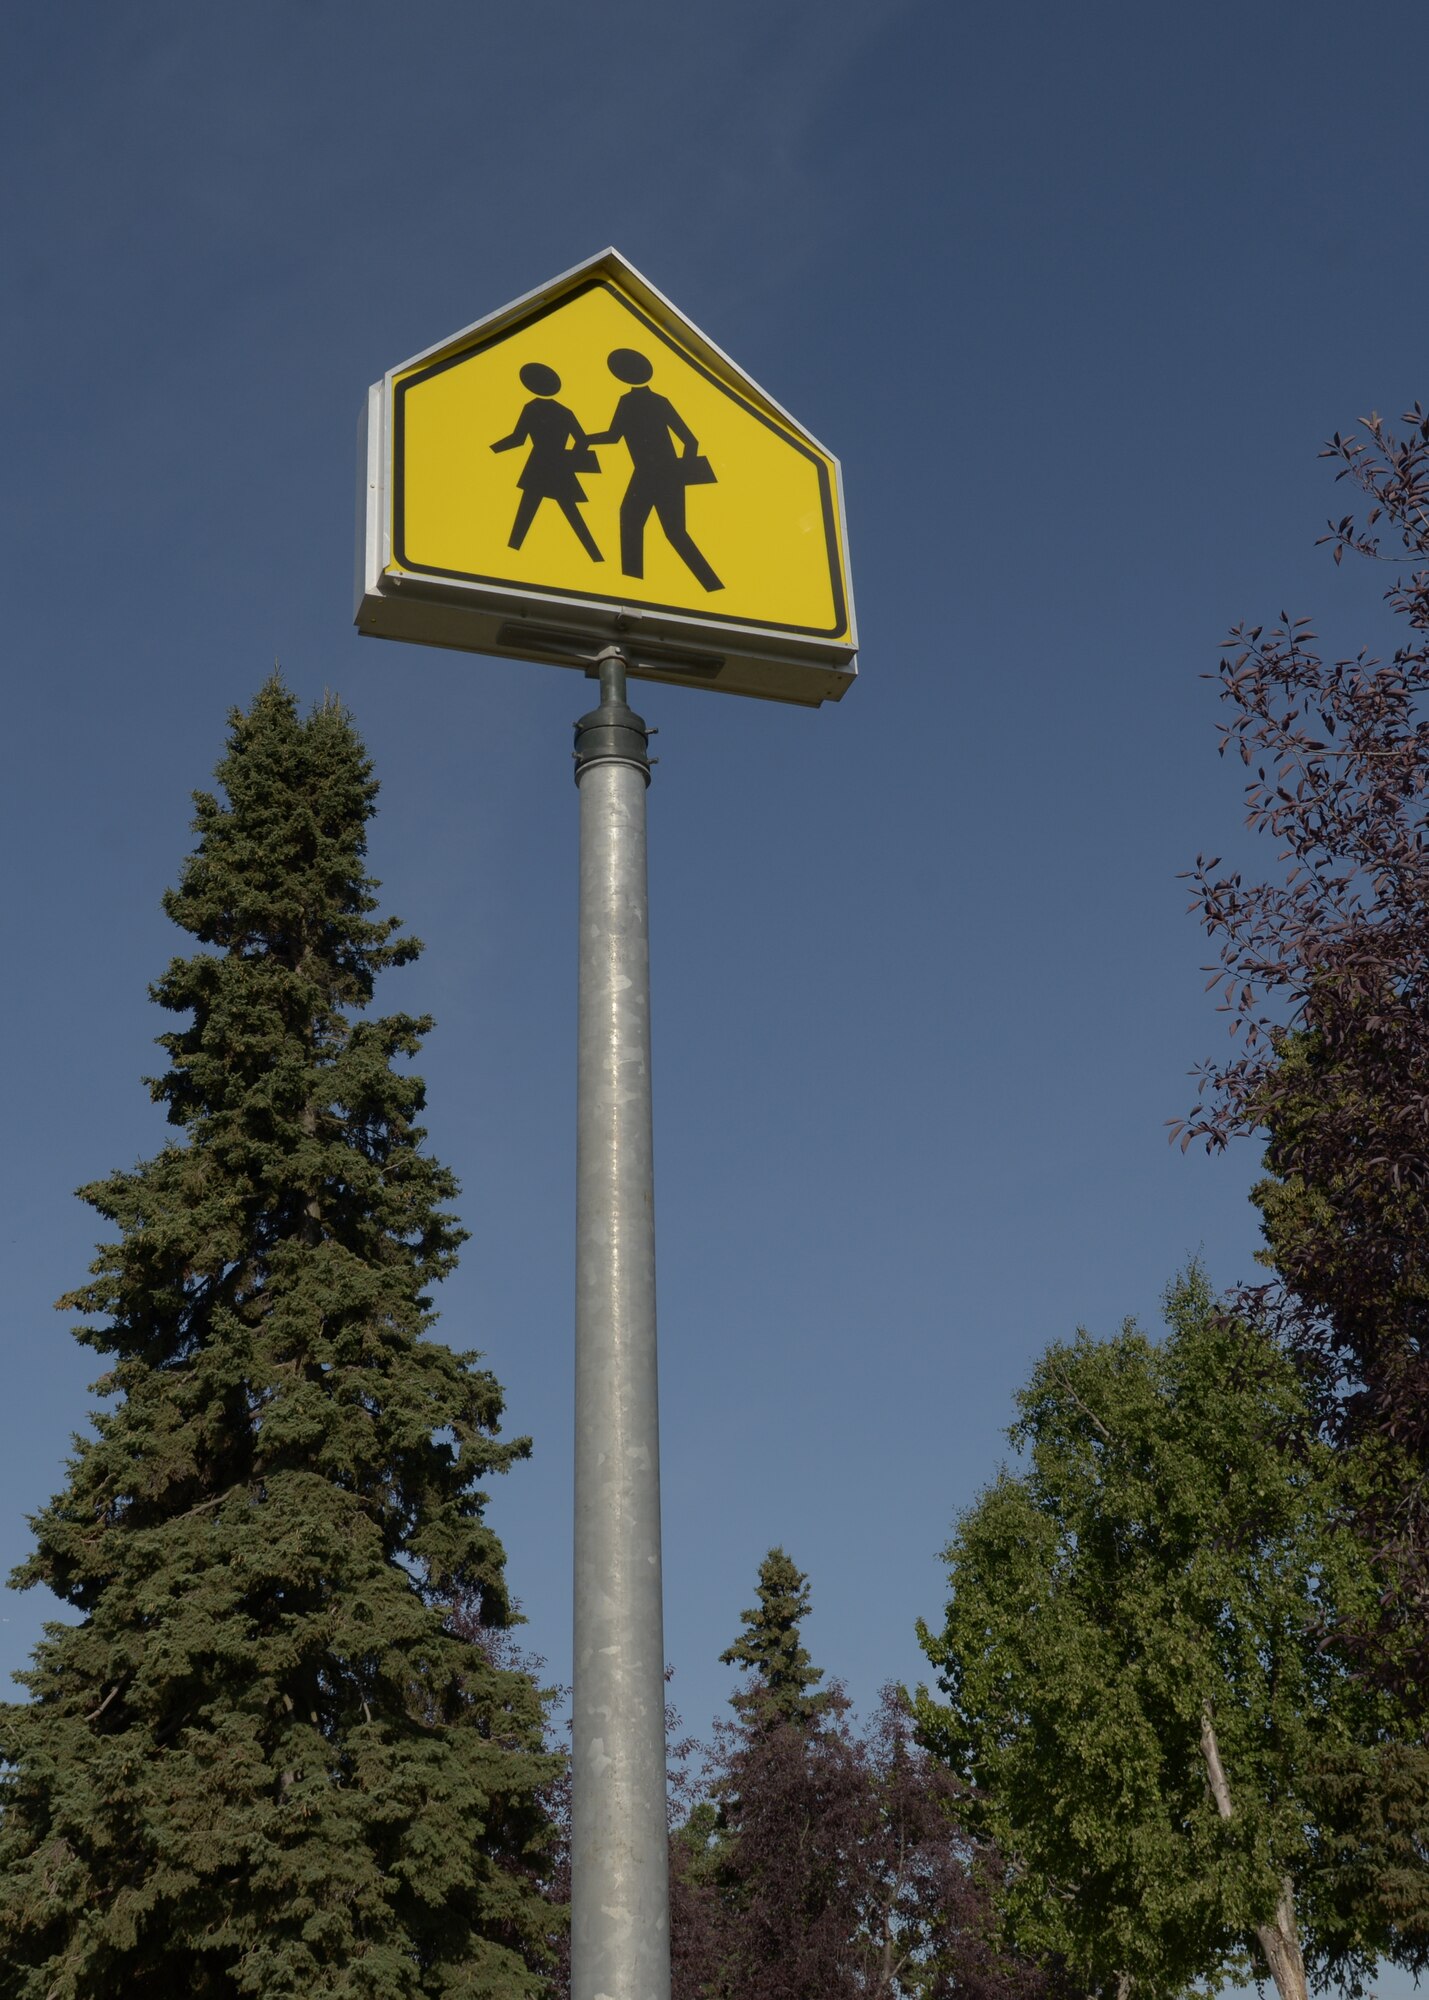 With the school year approaching, Joint Base Elmendorf-Richardson, Alaska, personnel should be mindful of pedestrians and school zones. Drivers must be vigilant and use situational awareness especially when children are traveling to school.